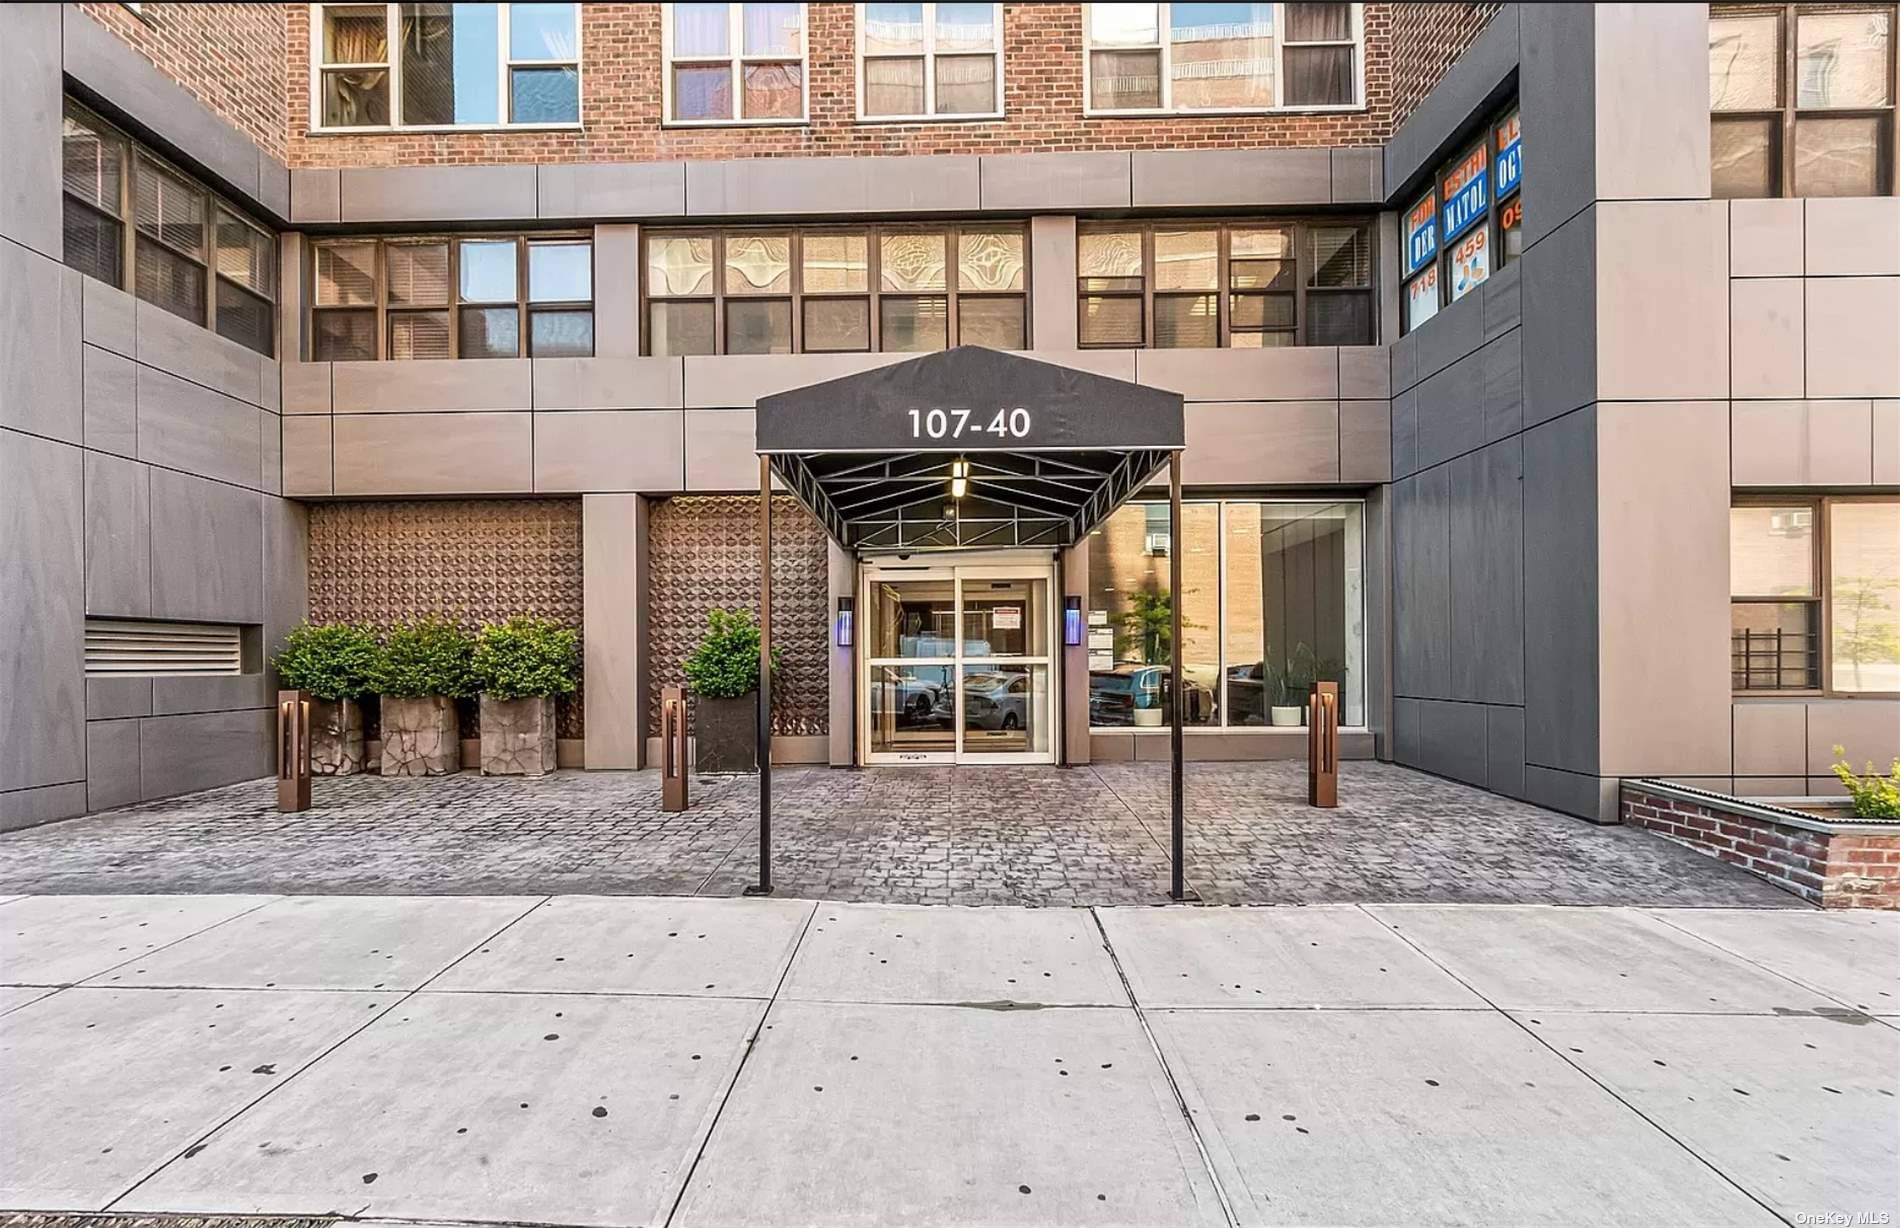 Lane Towers is a luxury high rise cond op building that was built in 1965 and has the best location in Forest Hills for urban lovers seeking convenience and amenities.